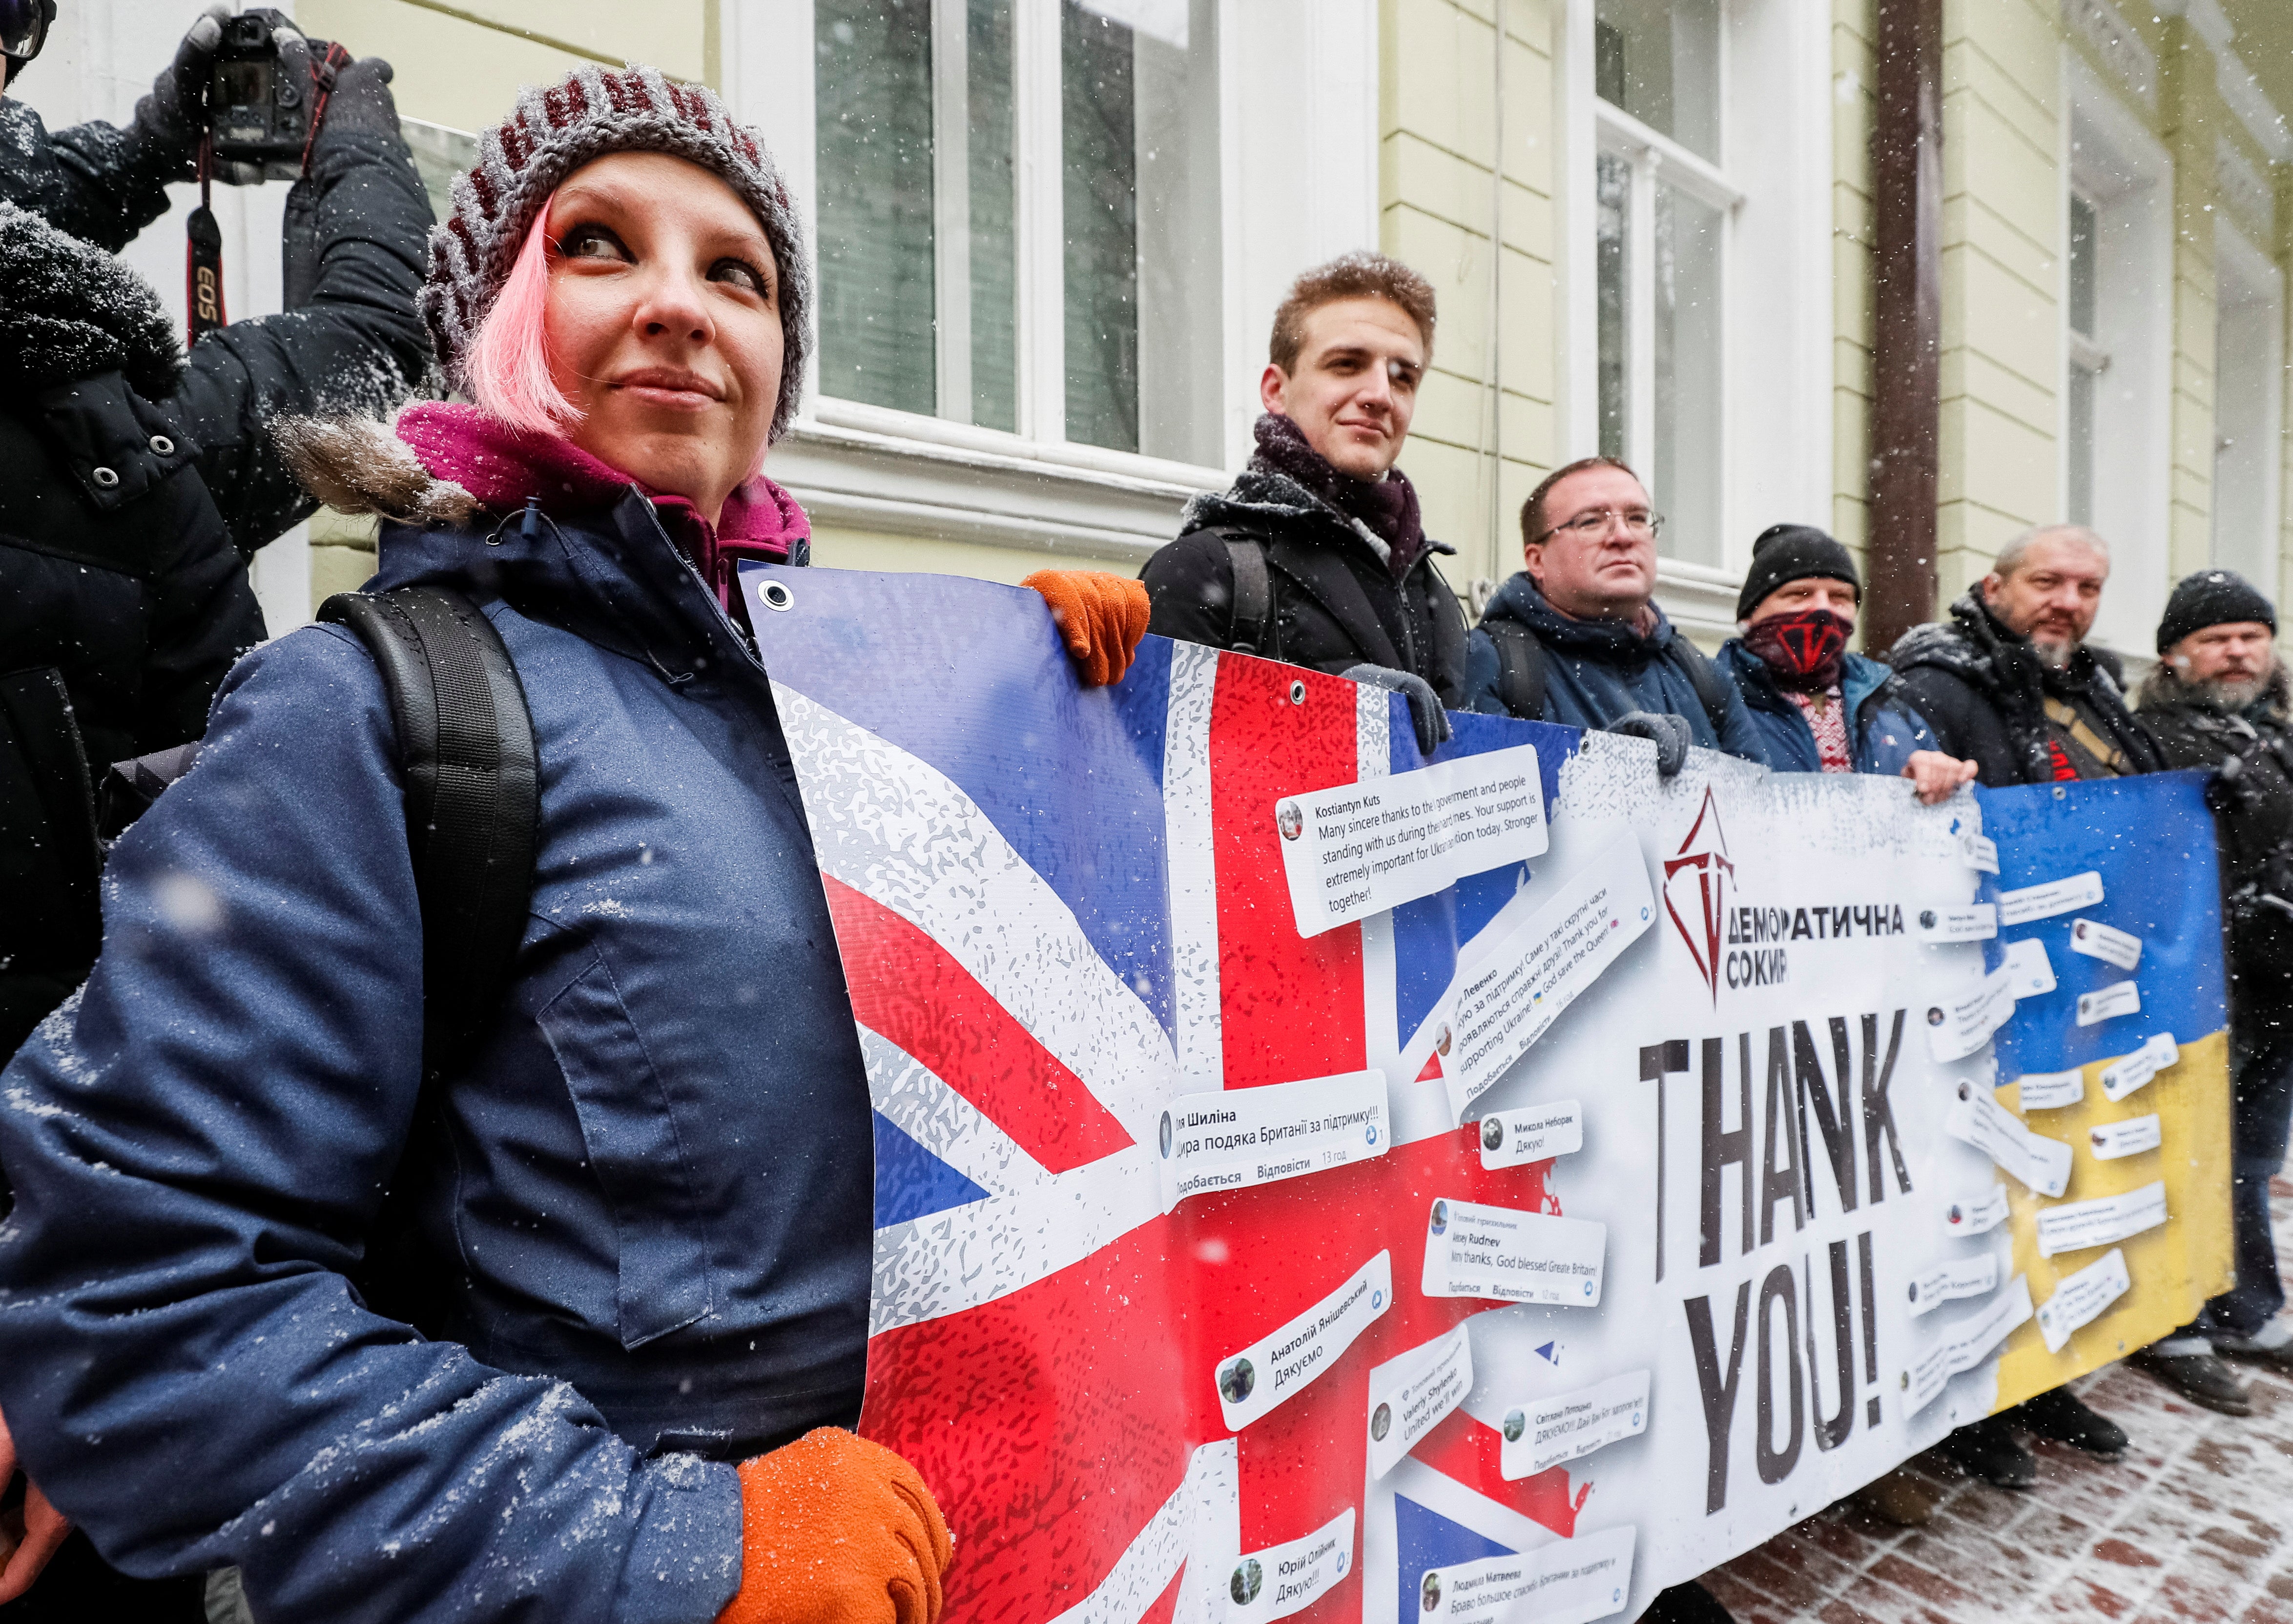 Members of the “Democratic Axe” political party take part in a rally to thank Britain for supplying Ukraine with anti-tank weapons in front of the British embassy in Kiev